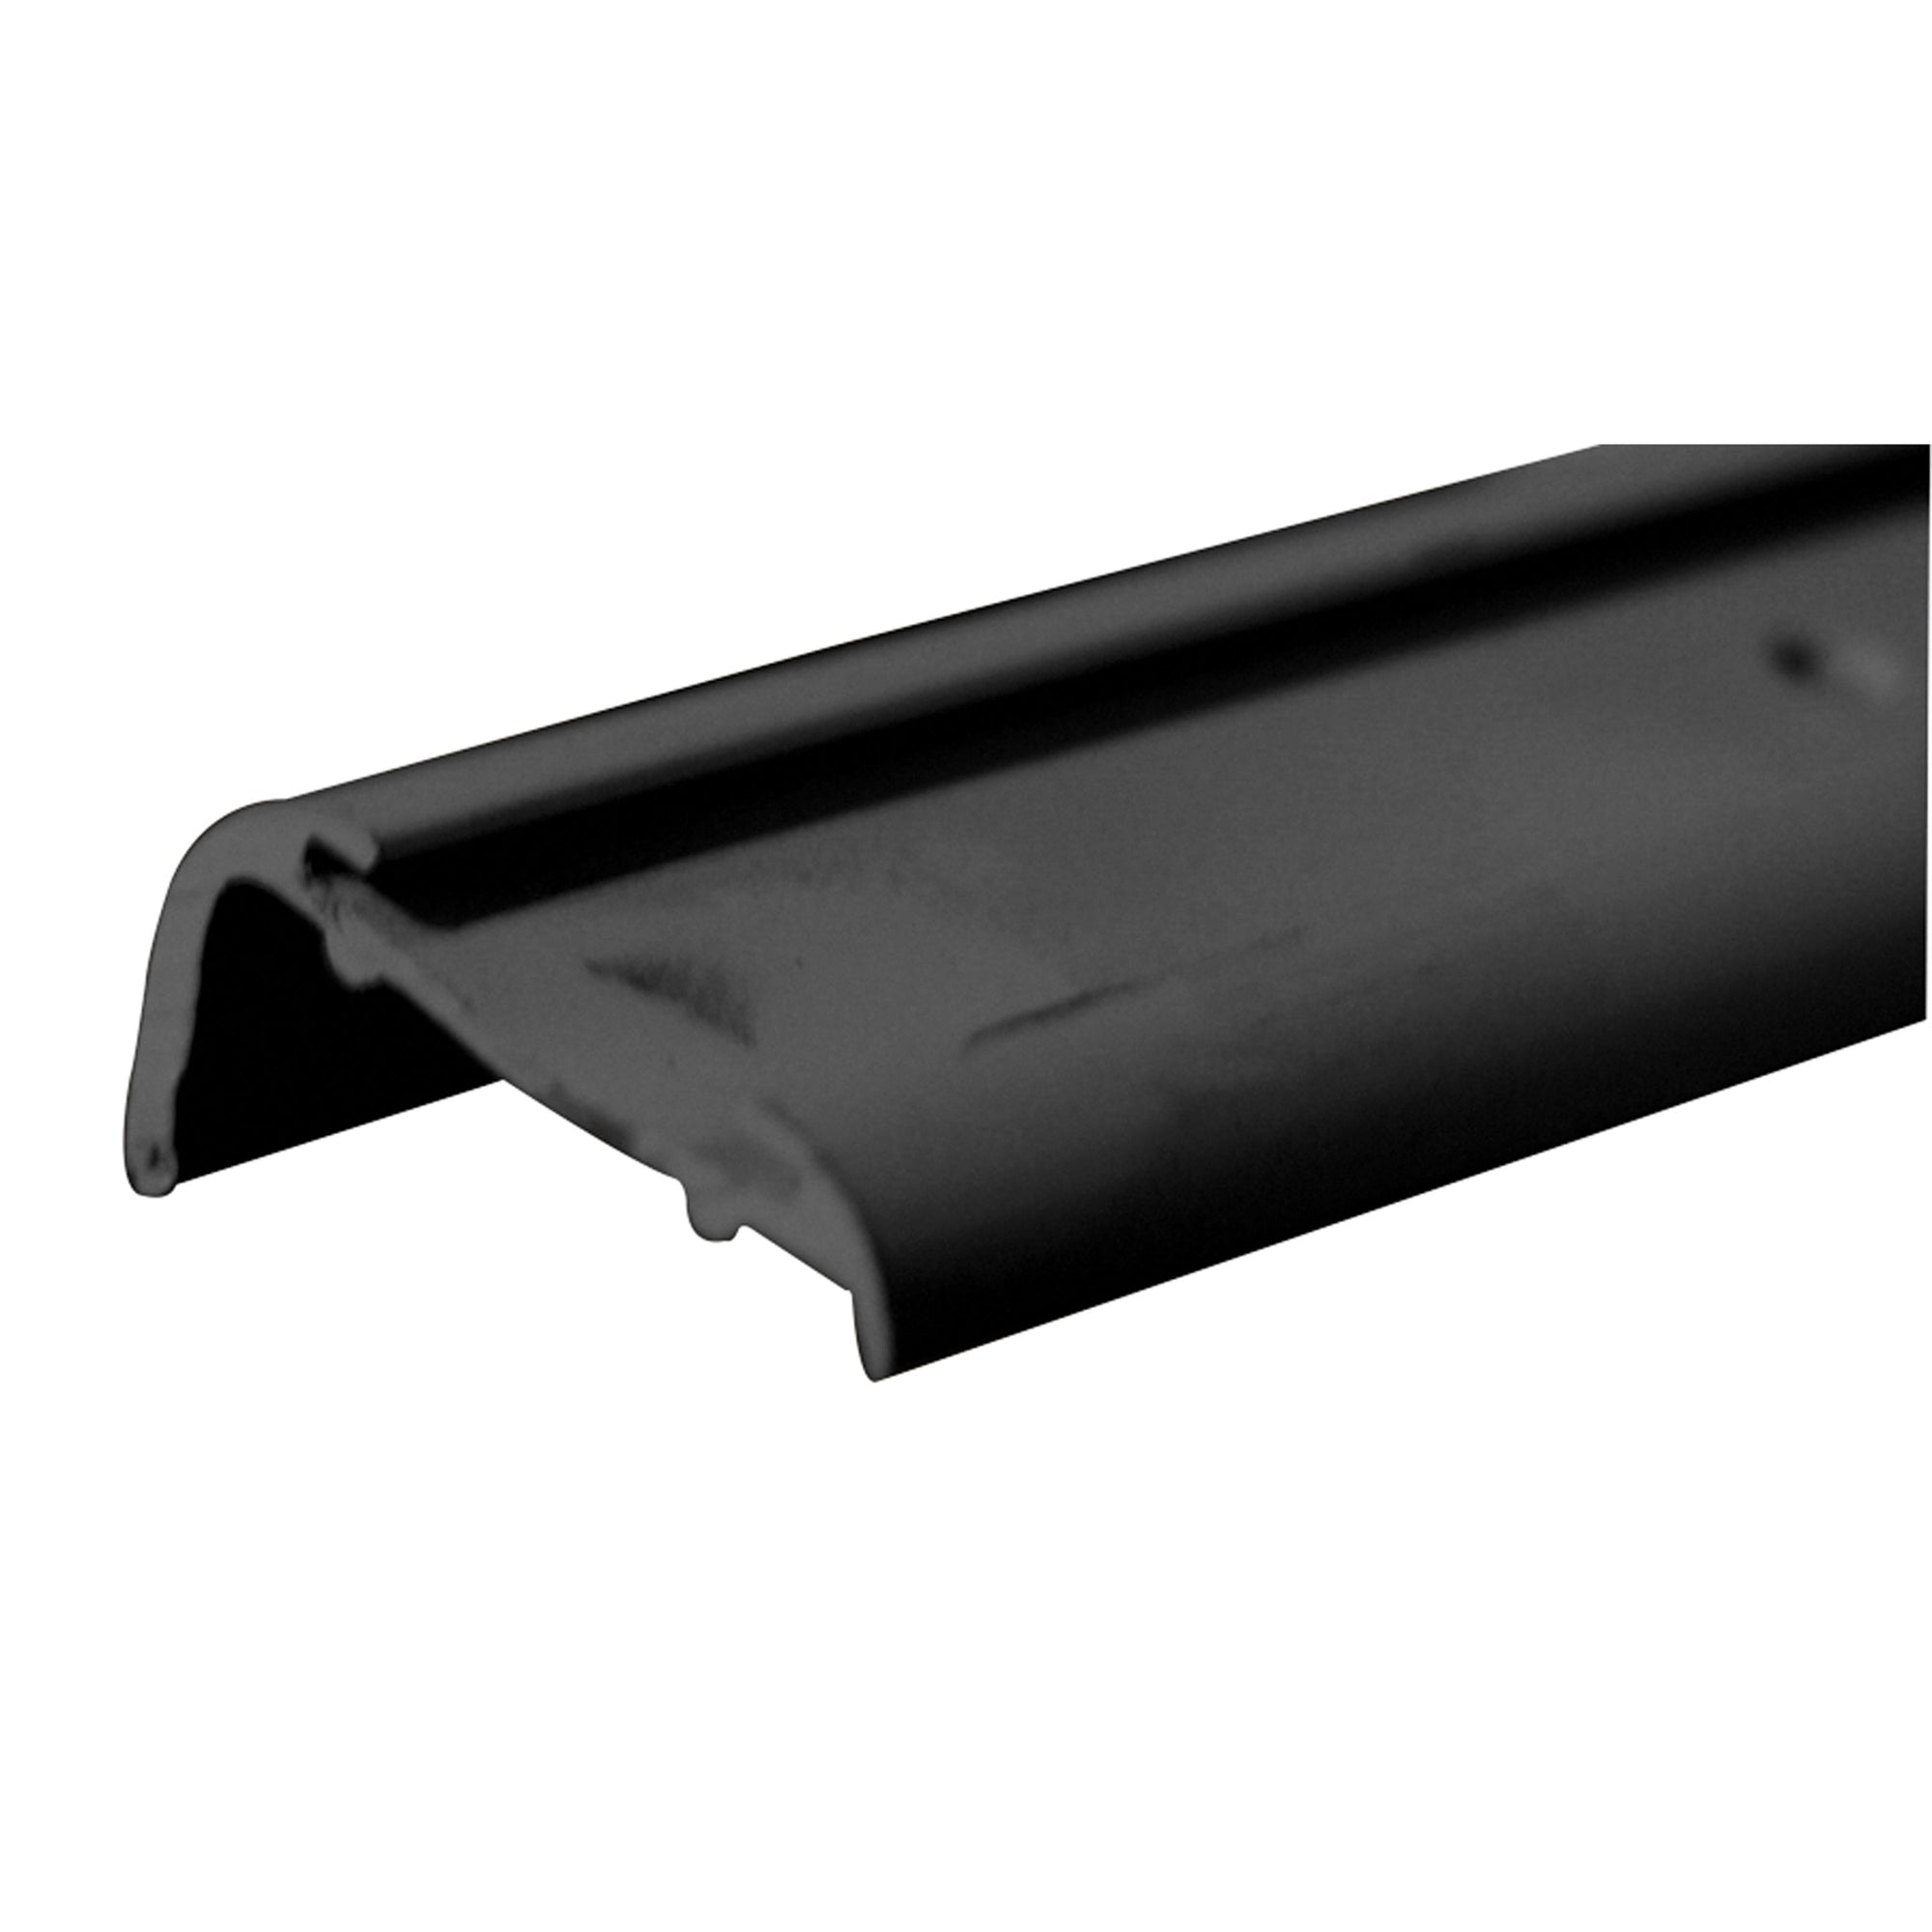 AP Products 021-57402-16 Insert Roof Edge - 16 ft., Black